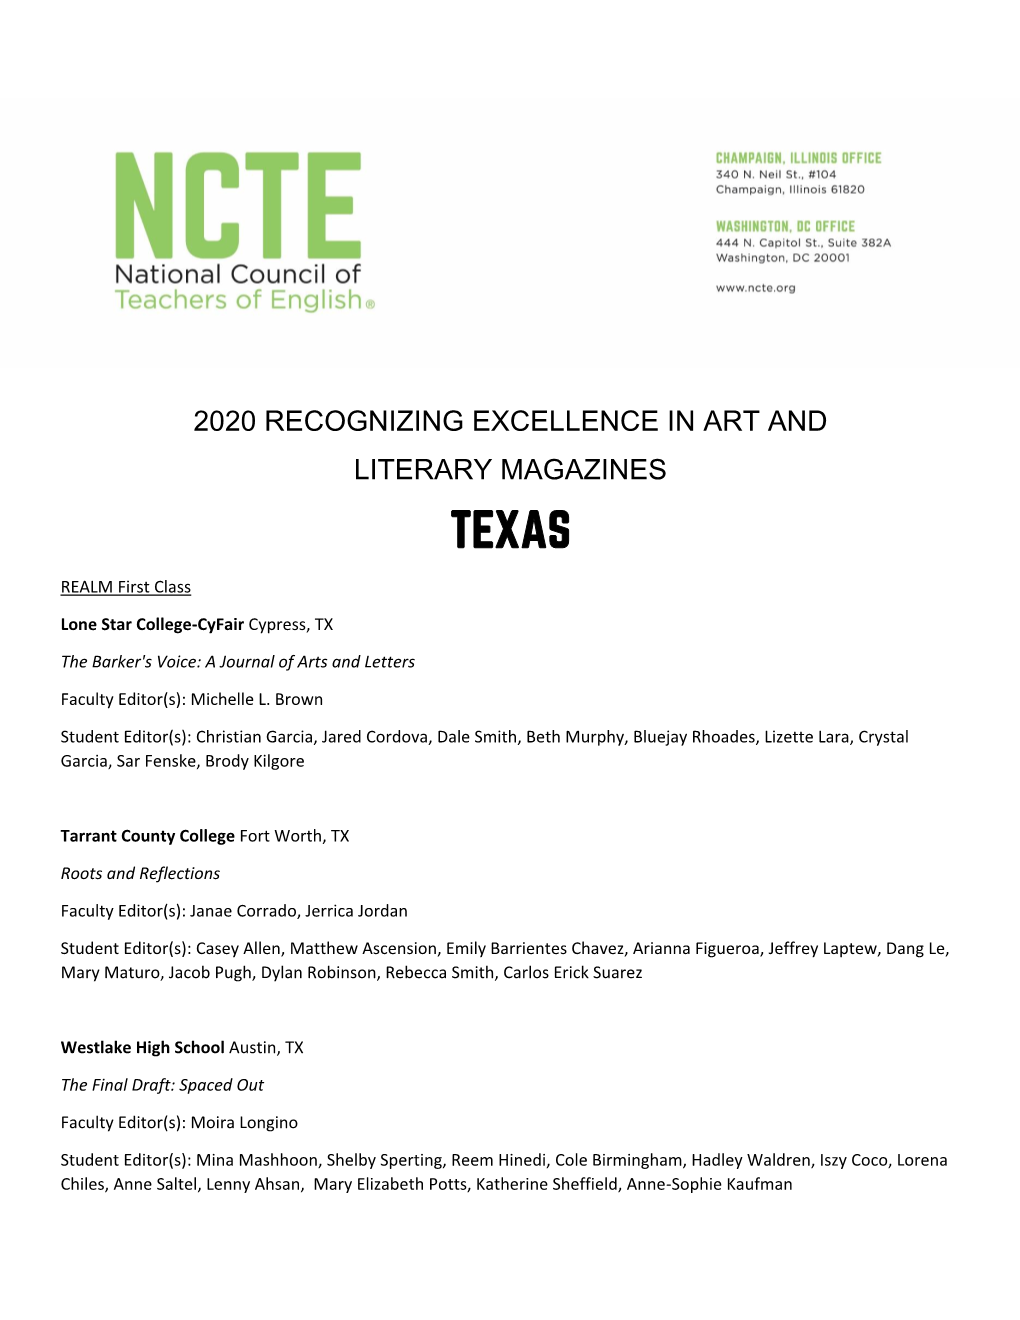 2020 Recognizing Excellence in Art and Literary Magazines Texas